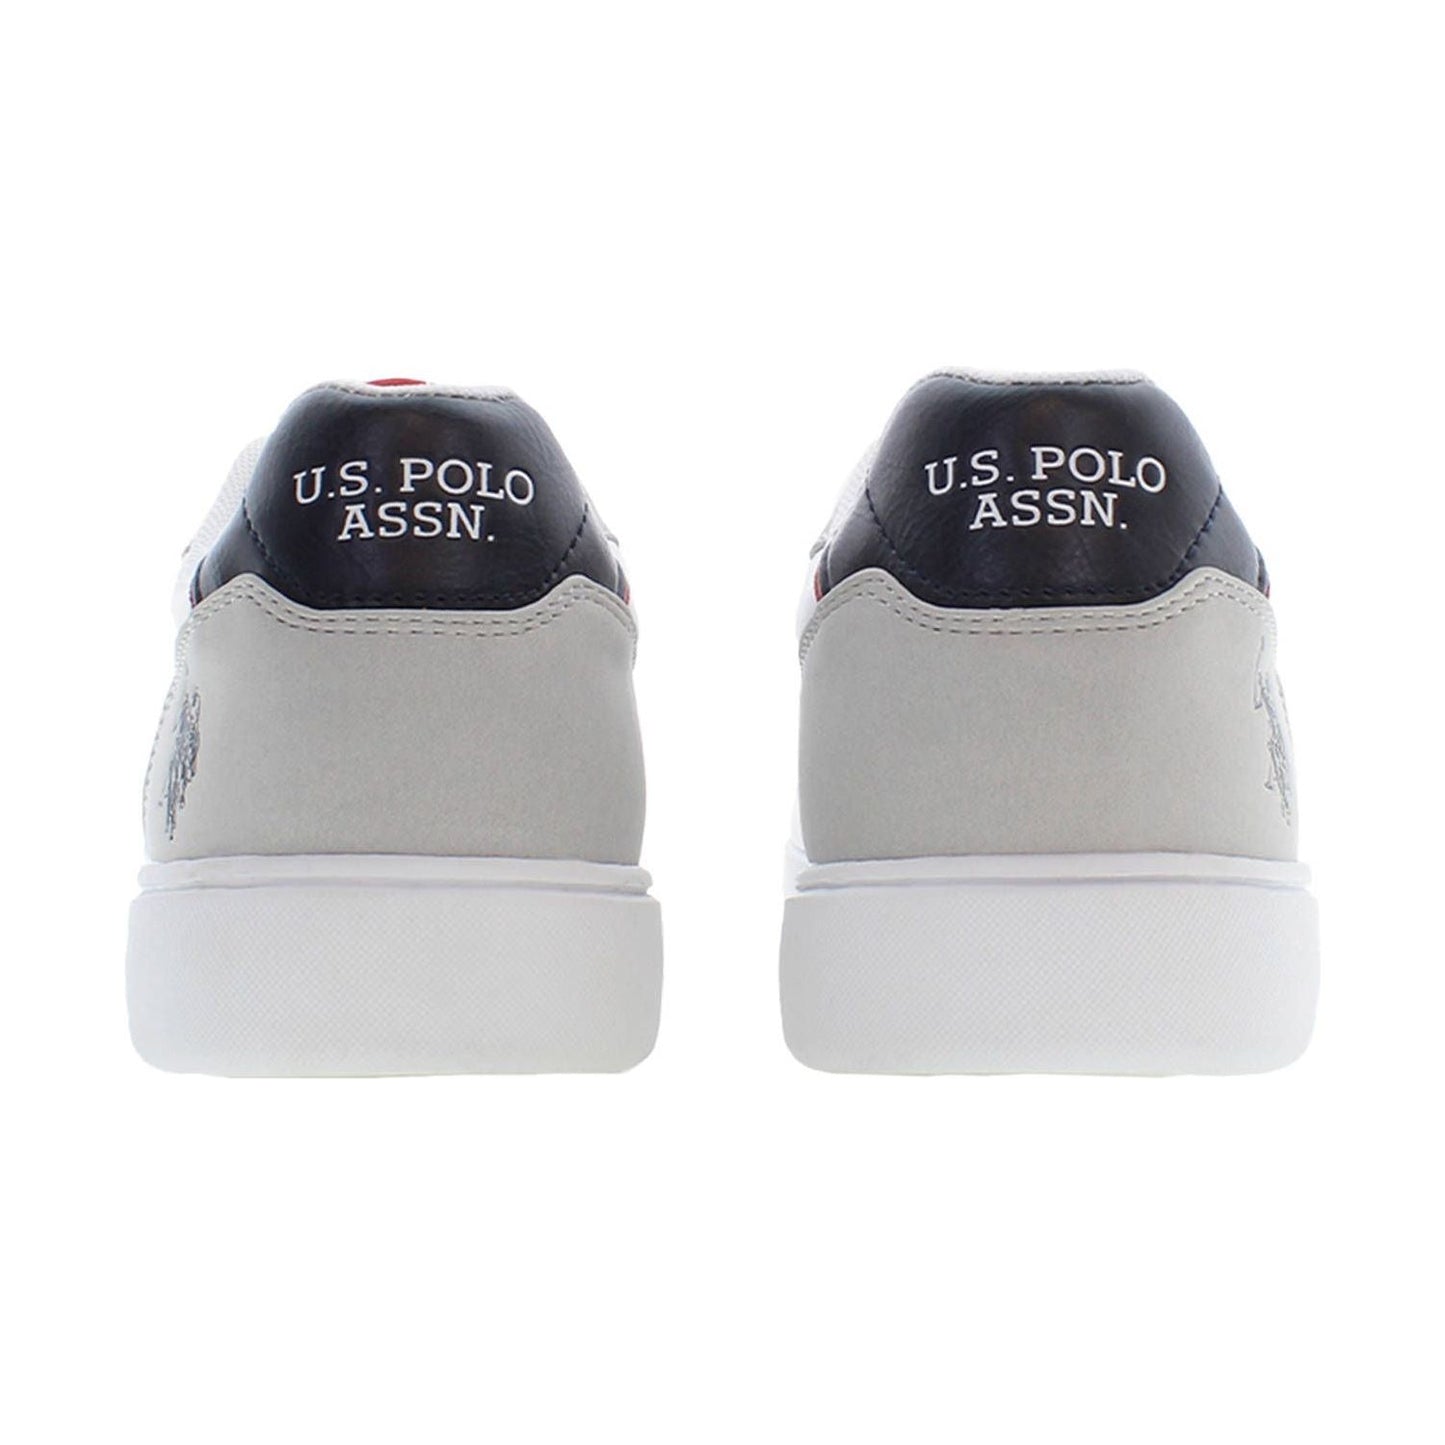 U.S. POLO ASSN. Chic Gray Lace-Up Sneakers with Logo Detail chic-gray-lace-up-sneakers-with-logo-detail